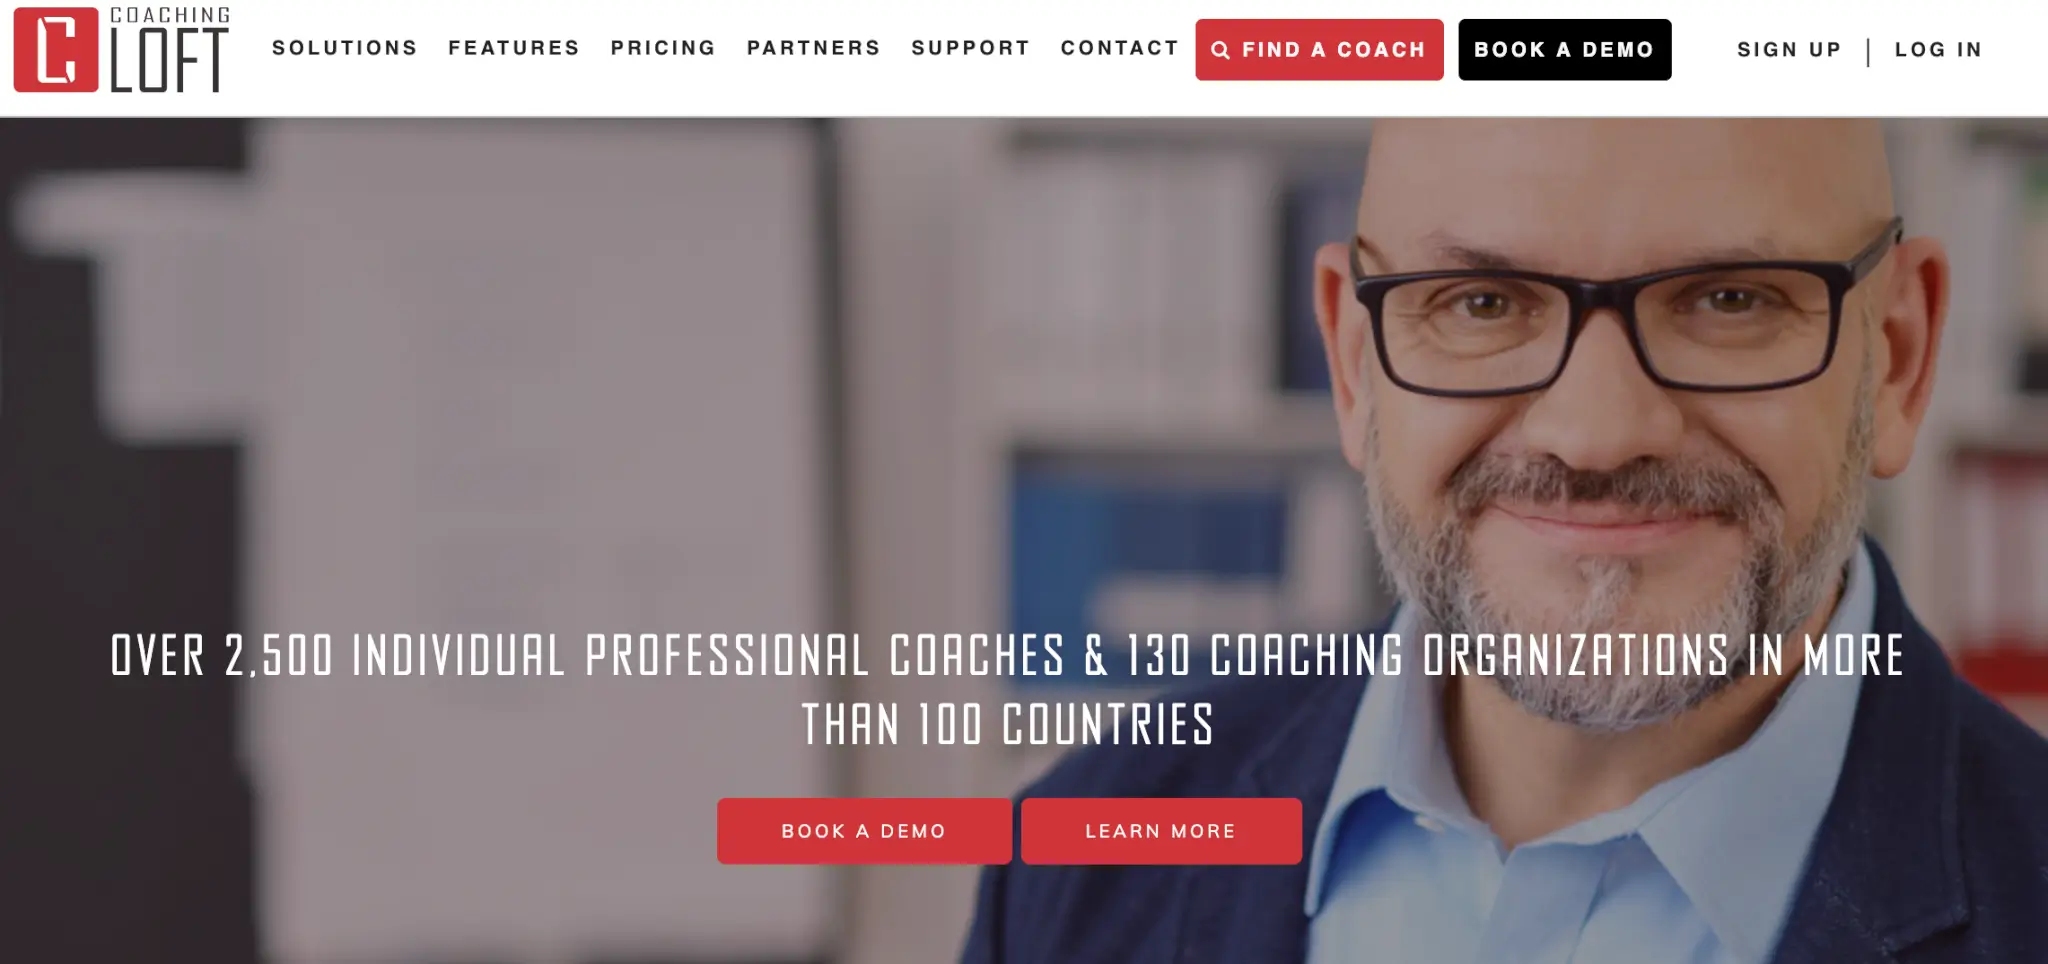 a screenshot of Coaching Loft Homepage showing a man in eyeglasses smiling at the camera